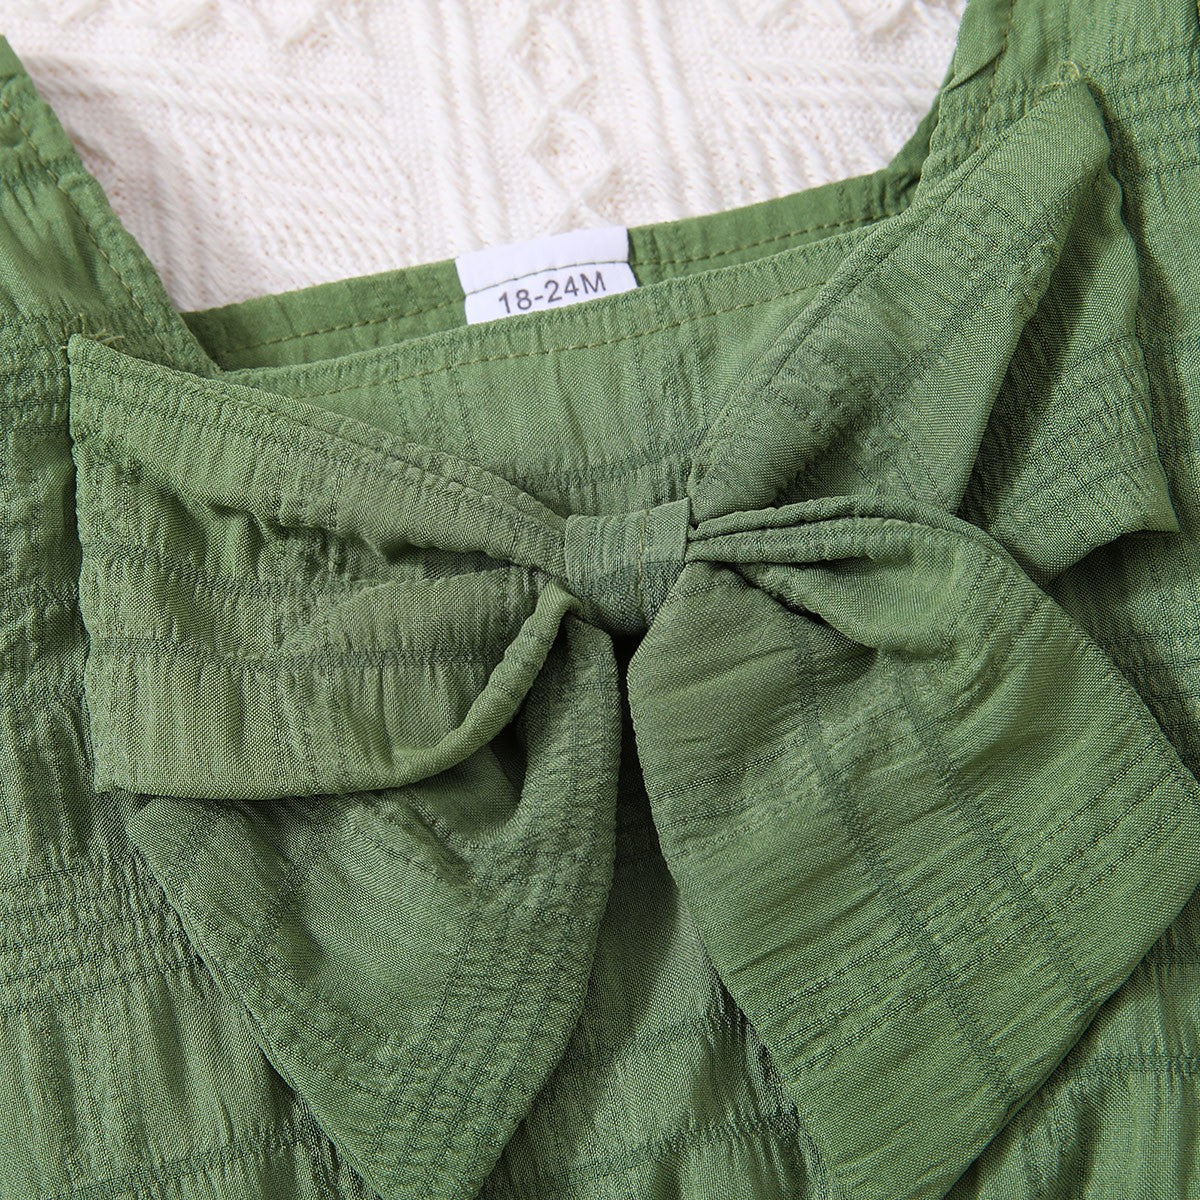 Kids Girls Textured Bow Detail Top and Belted Shorts Set